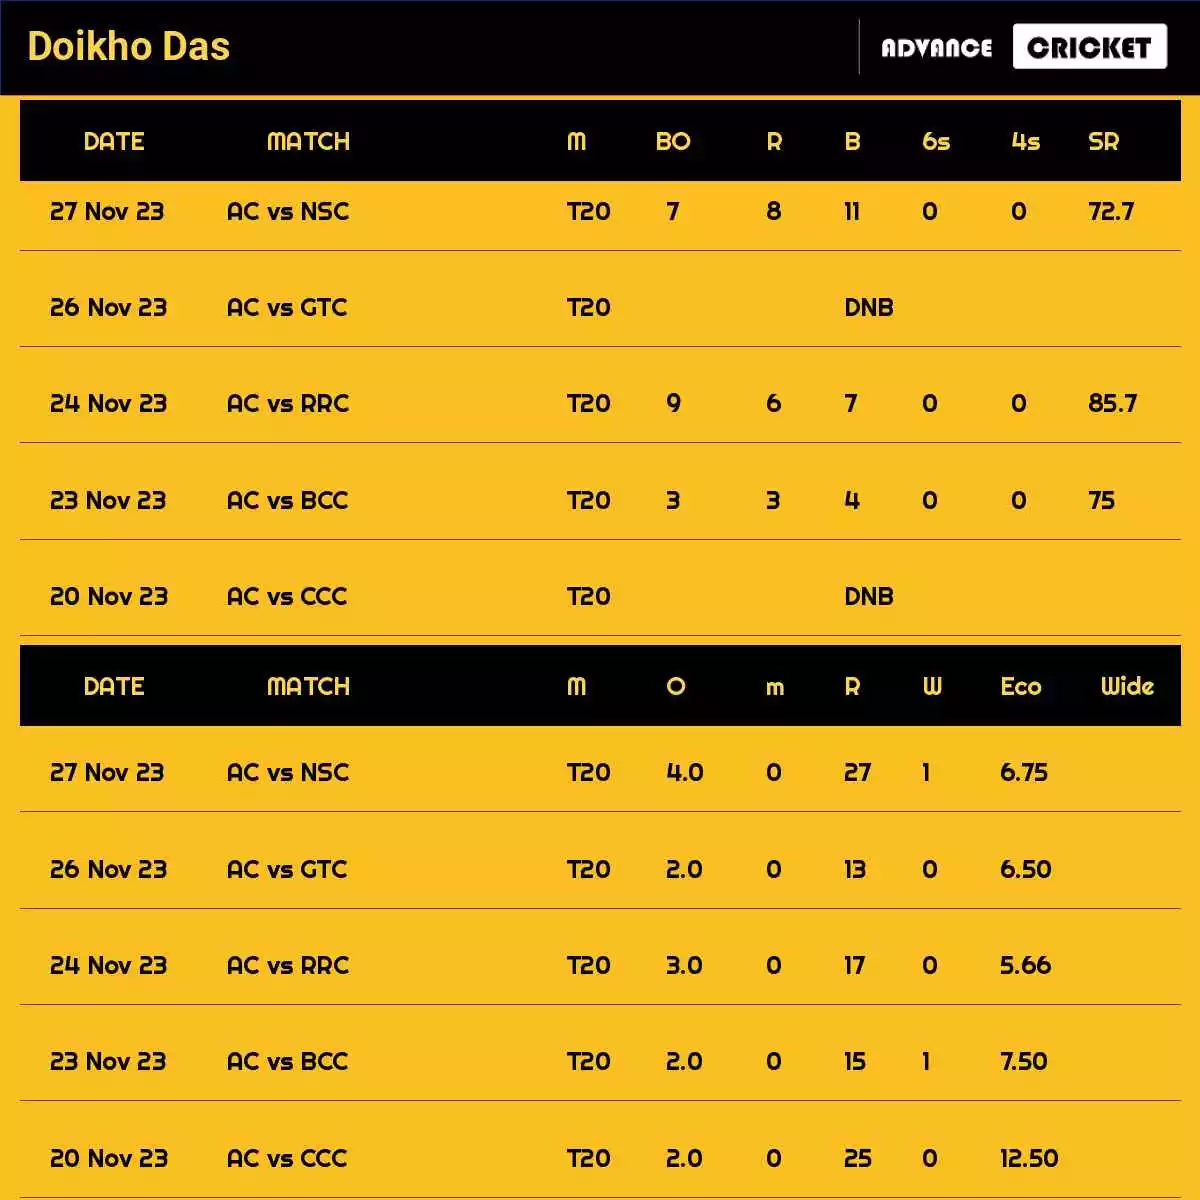 Doikho Das Recent Matches Details Date Wise